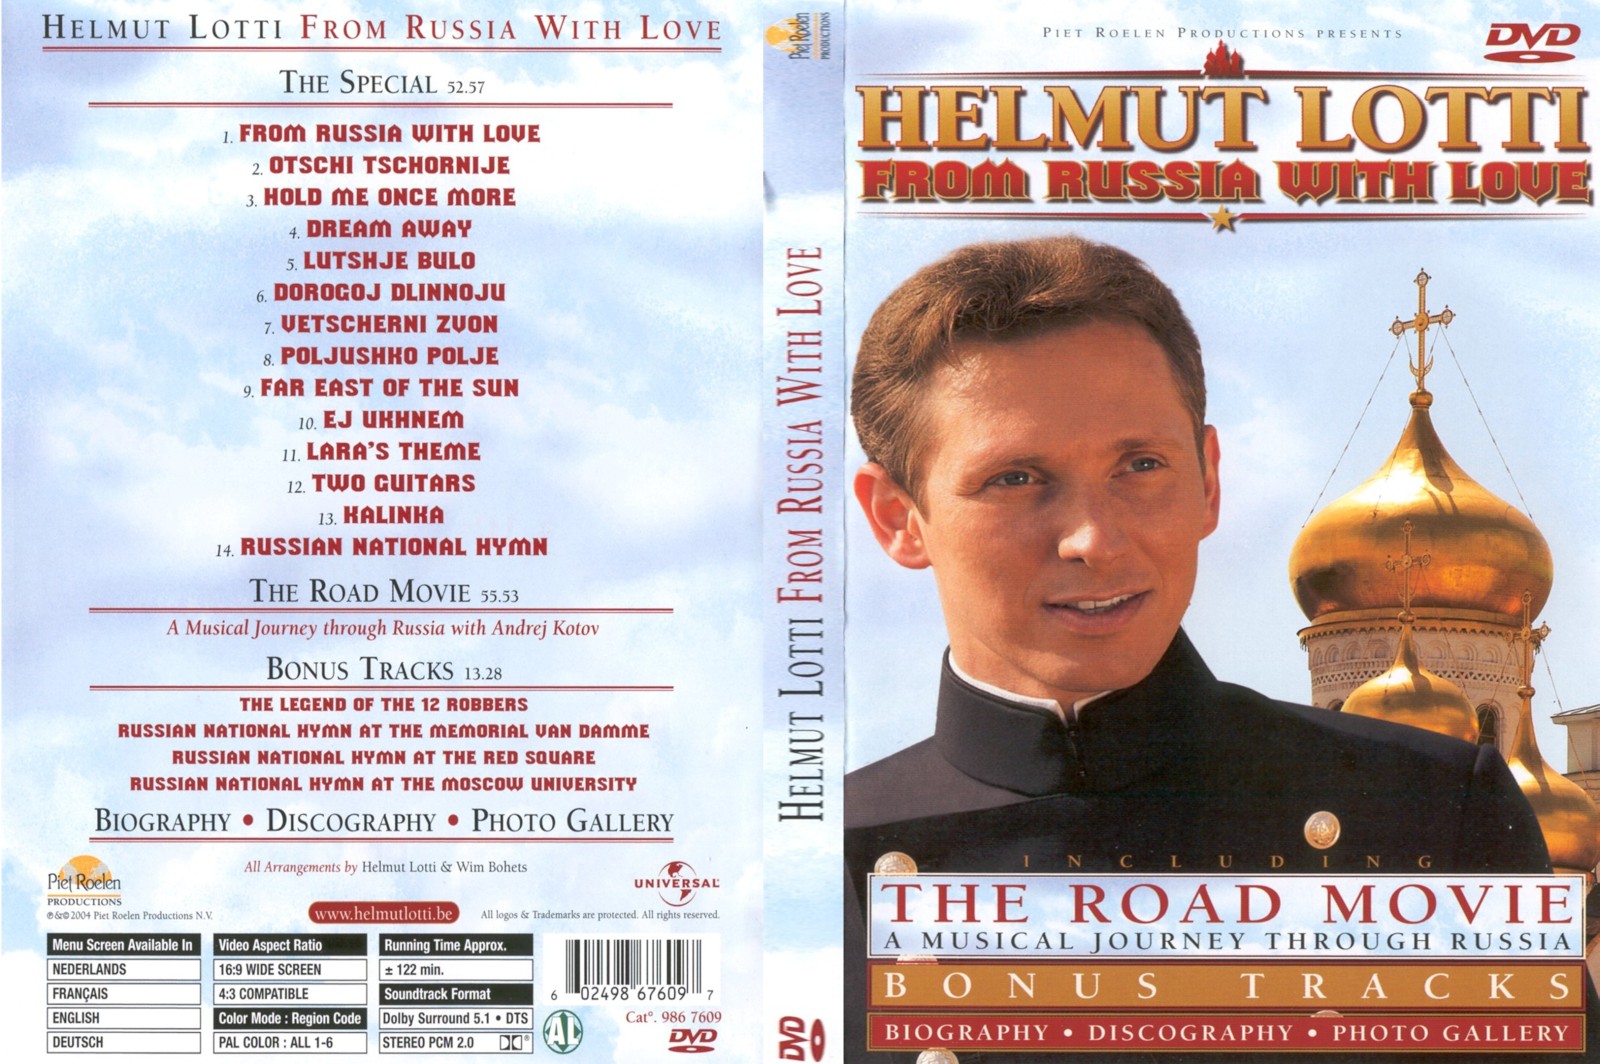 Jaquette DVD Helmut Lotti from russia with love